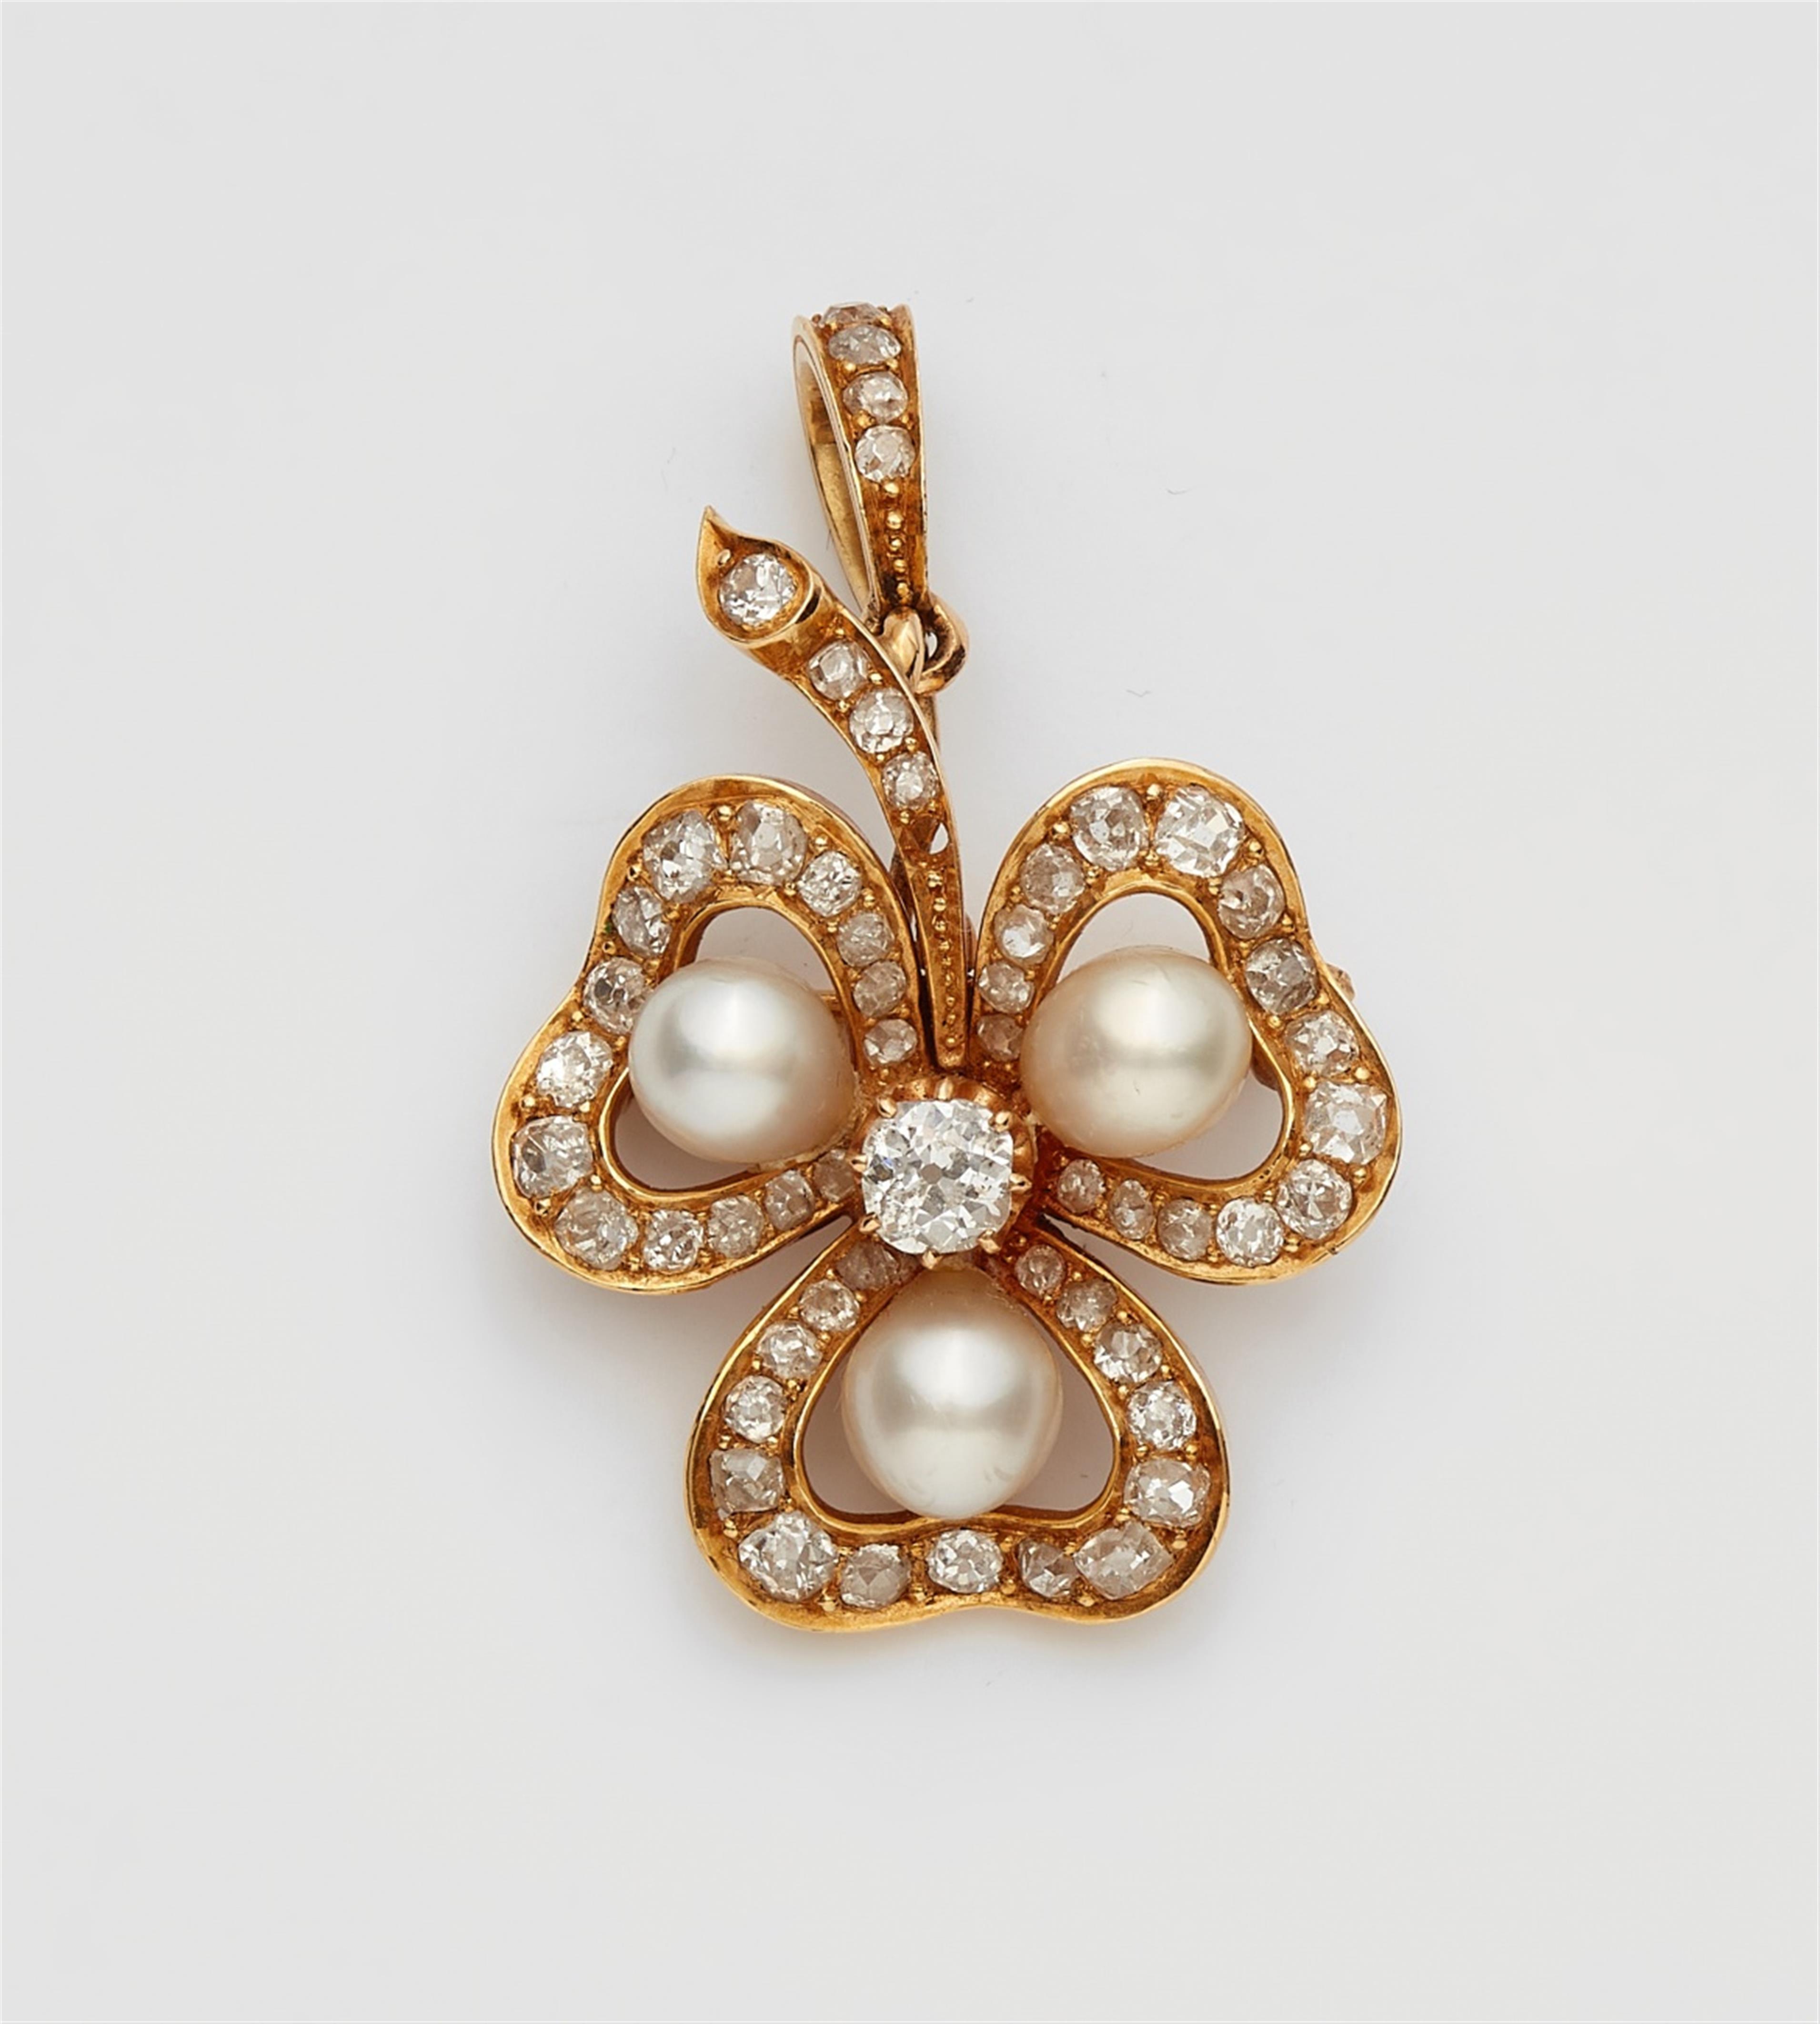 An 18k gold, diamond and pearl pendant brooch - image-1